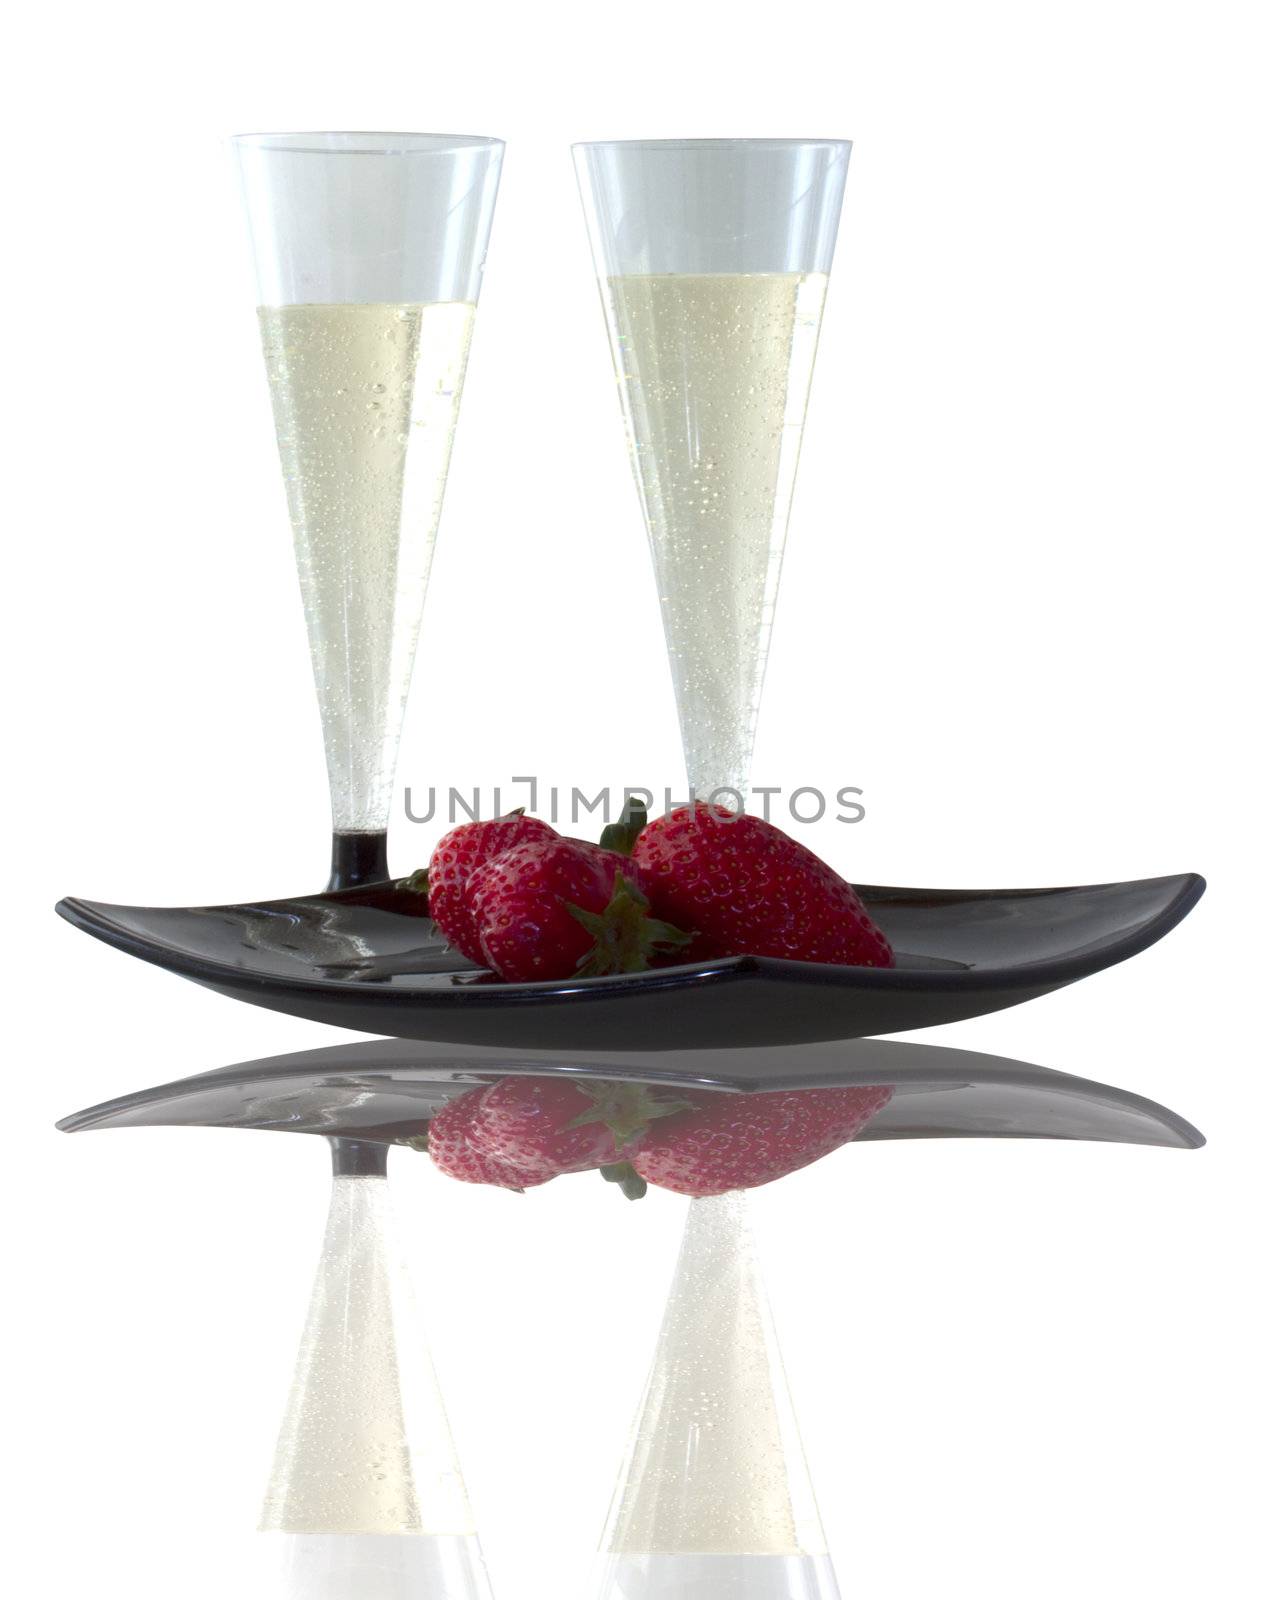 Two glasses of spumante and some strawberries on black plate